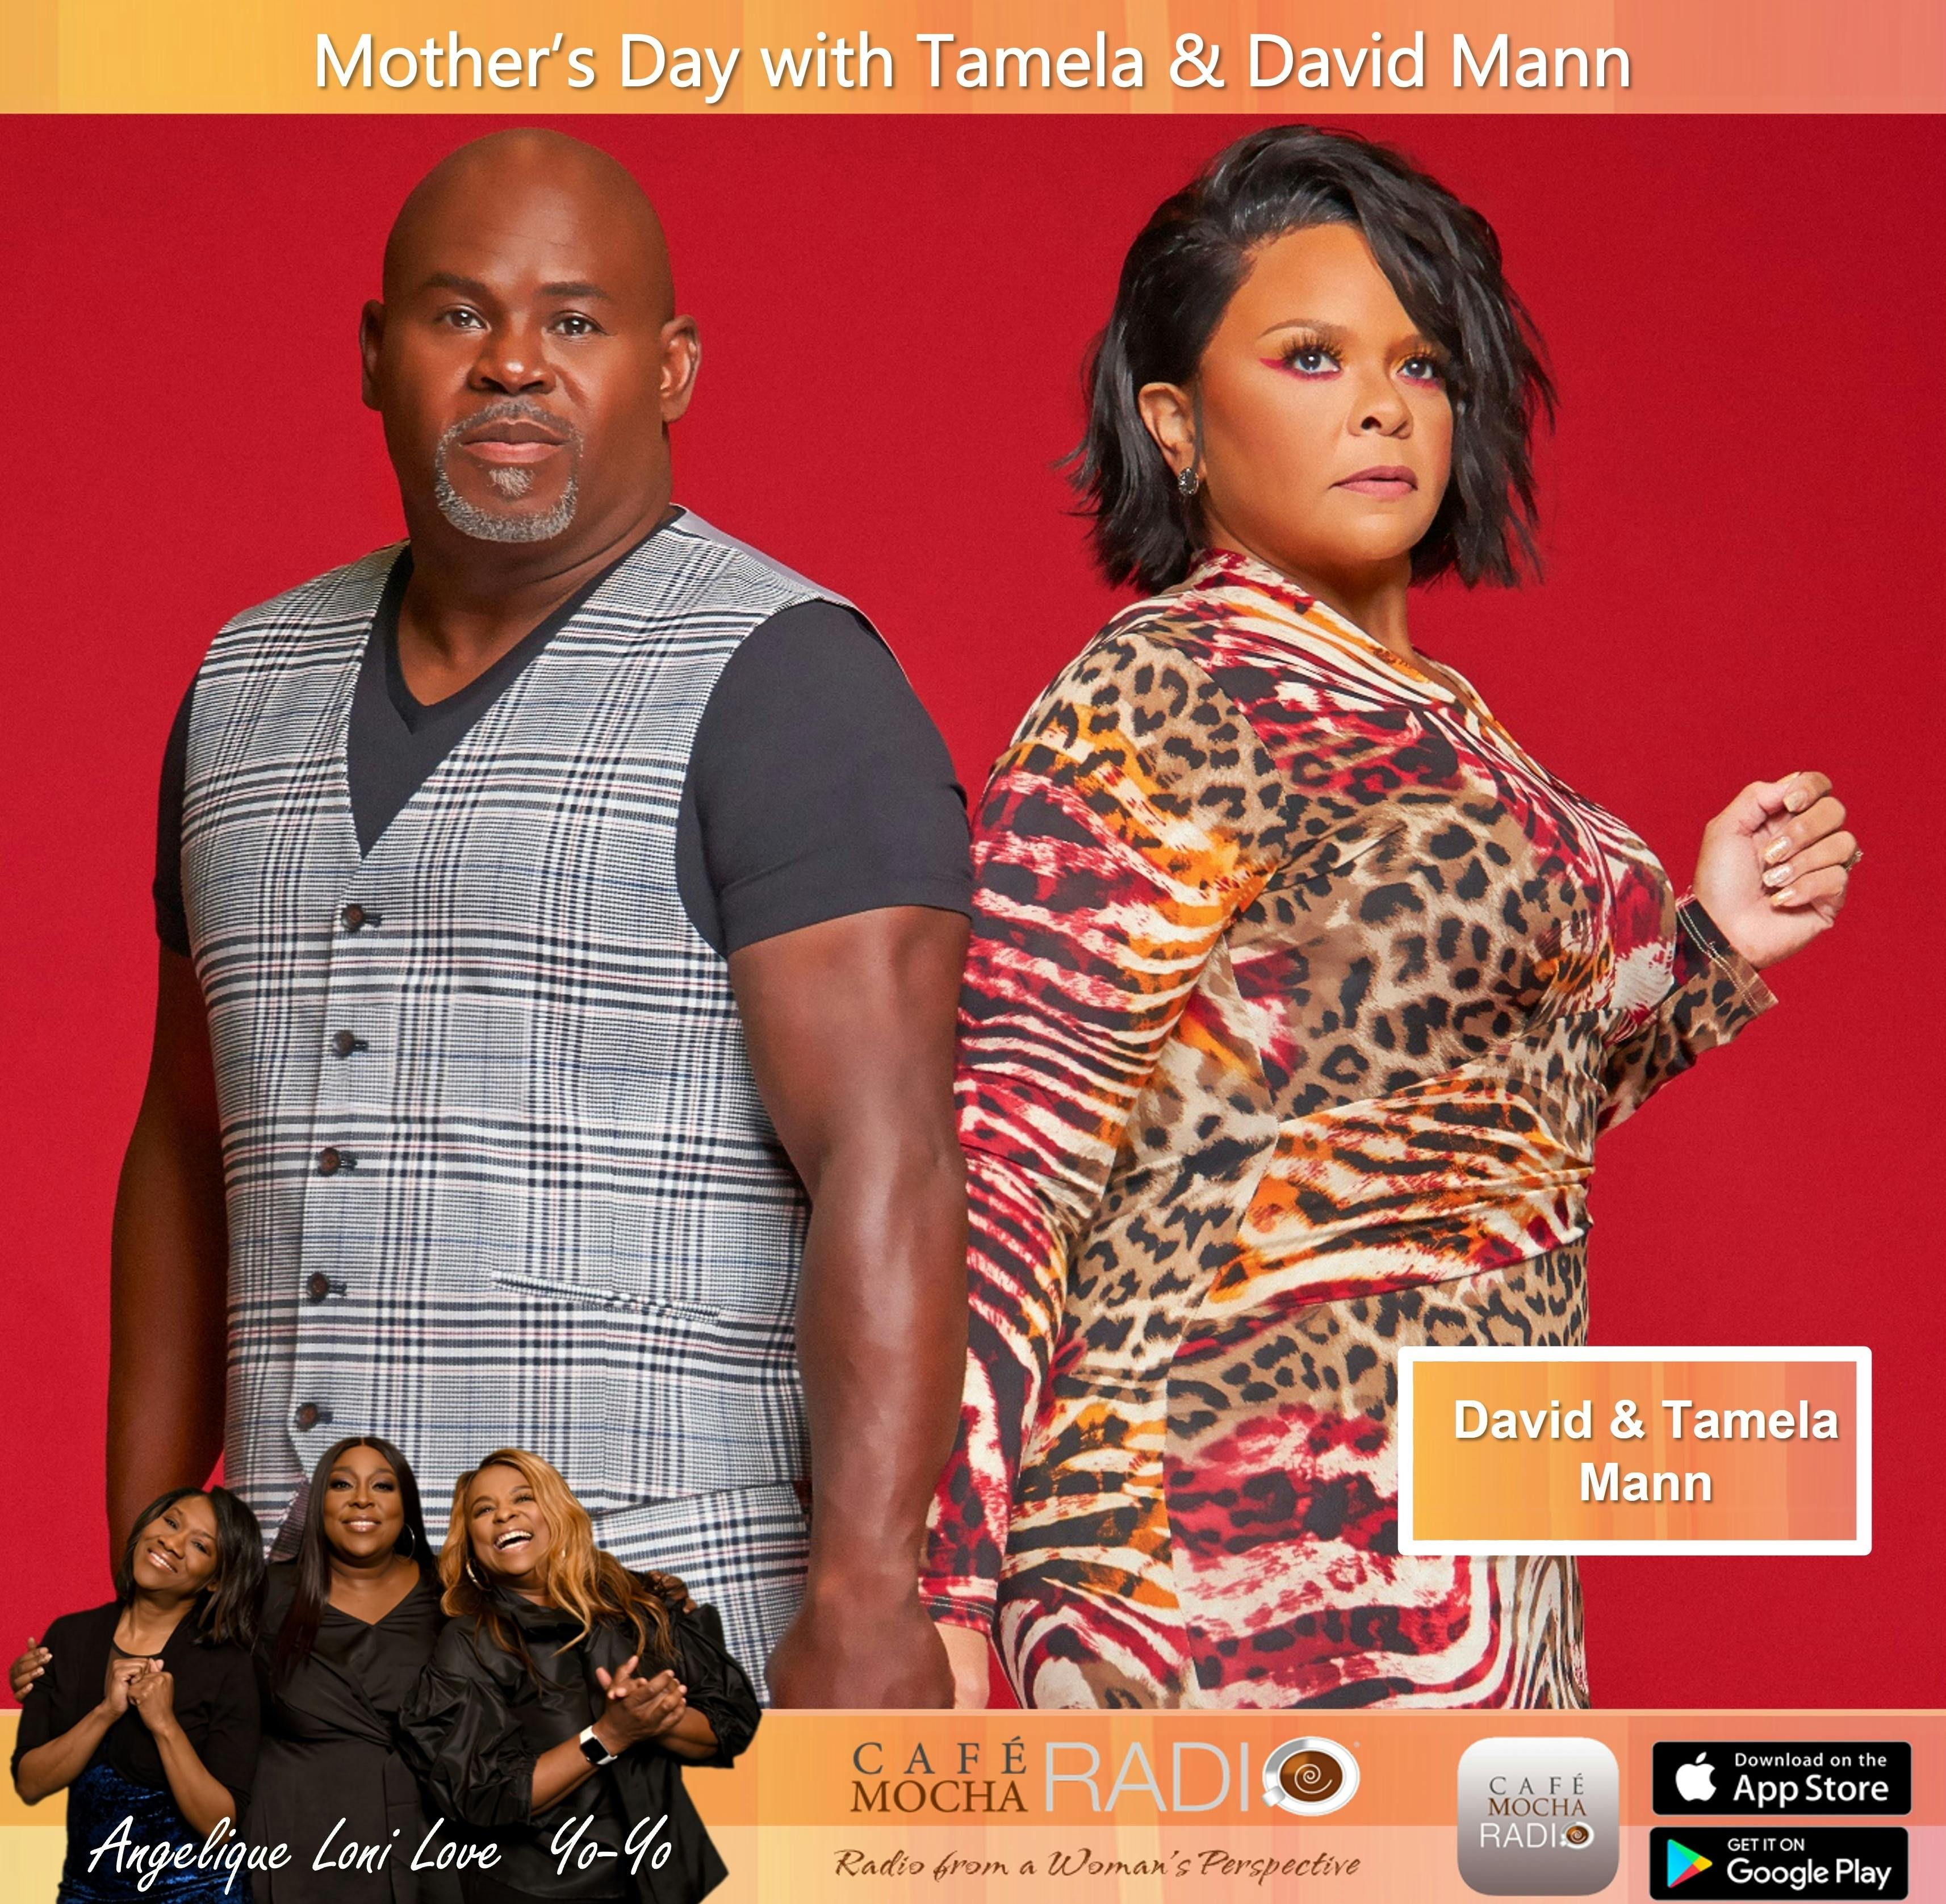 Mother’s Day with Tamela & David Mann